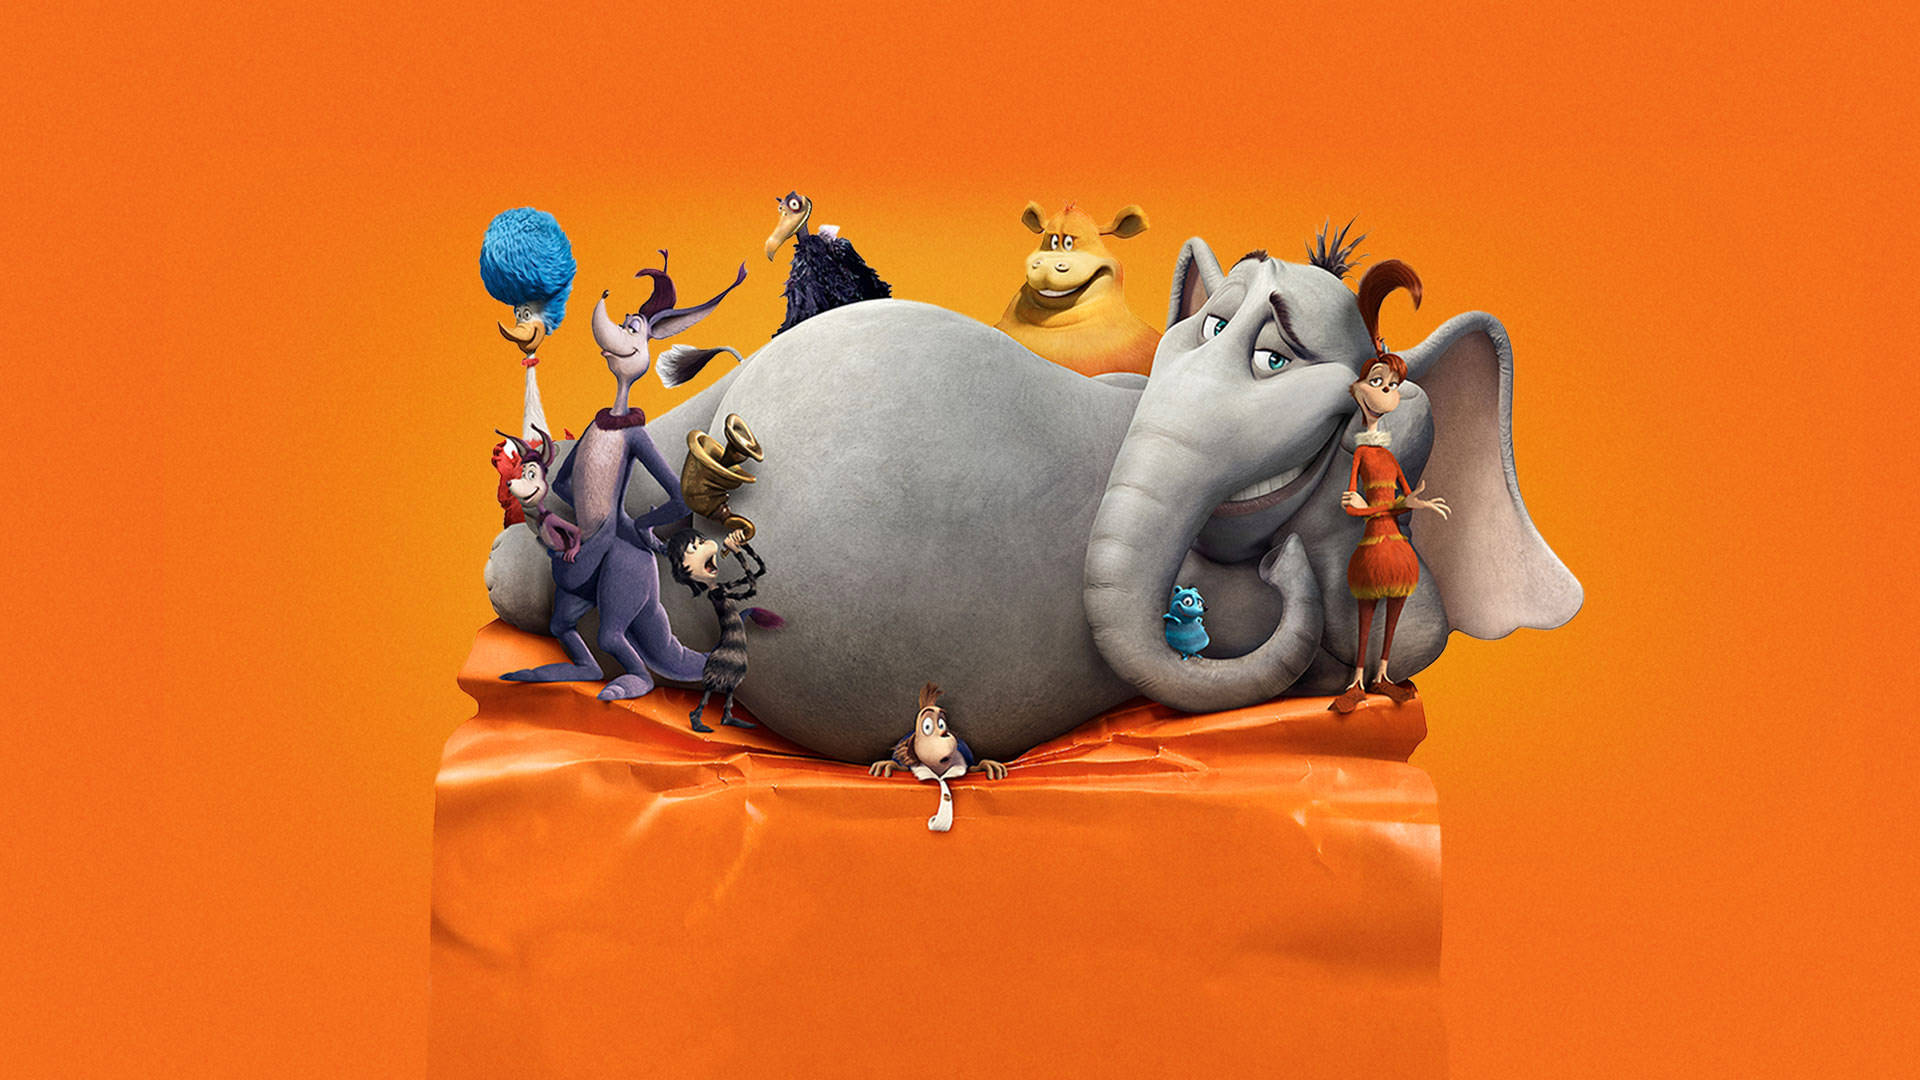 Top 999+ Horton Hears A Who Wallpaper Full HD, 4K Free to Use